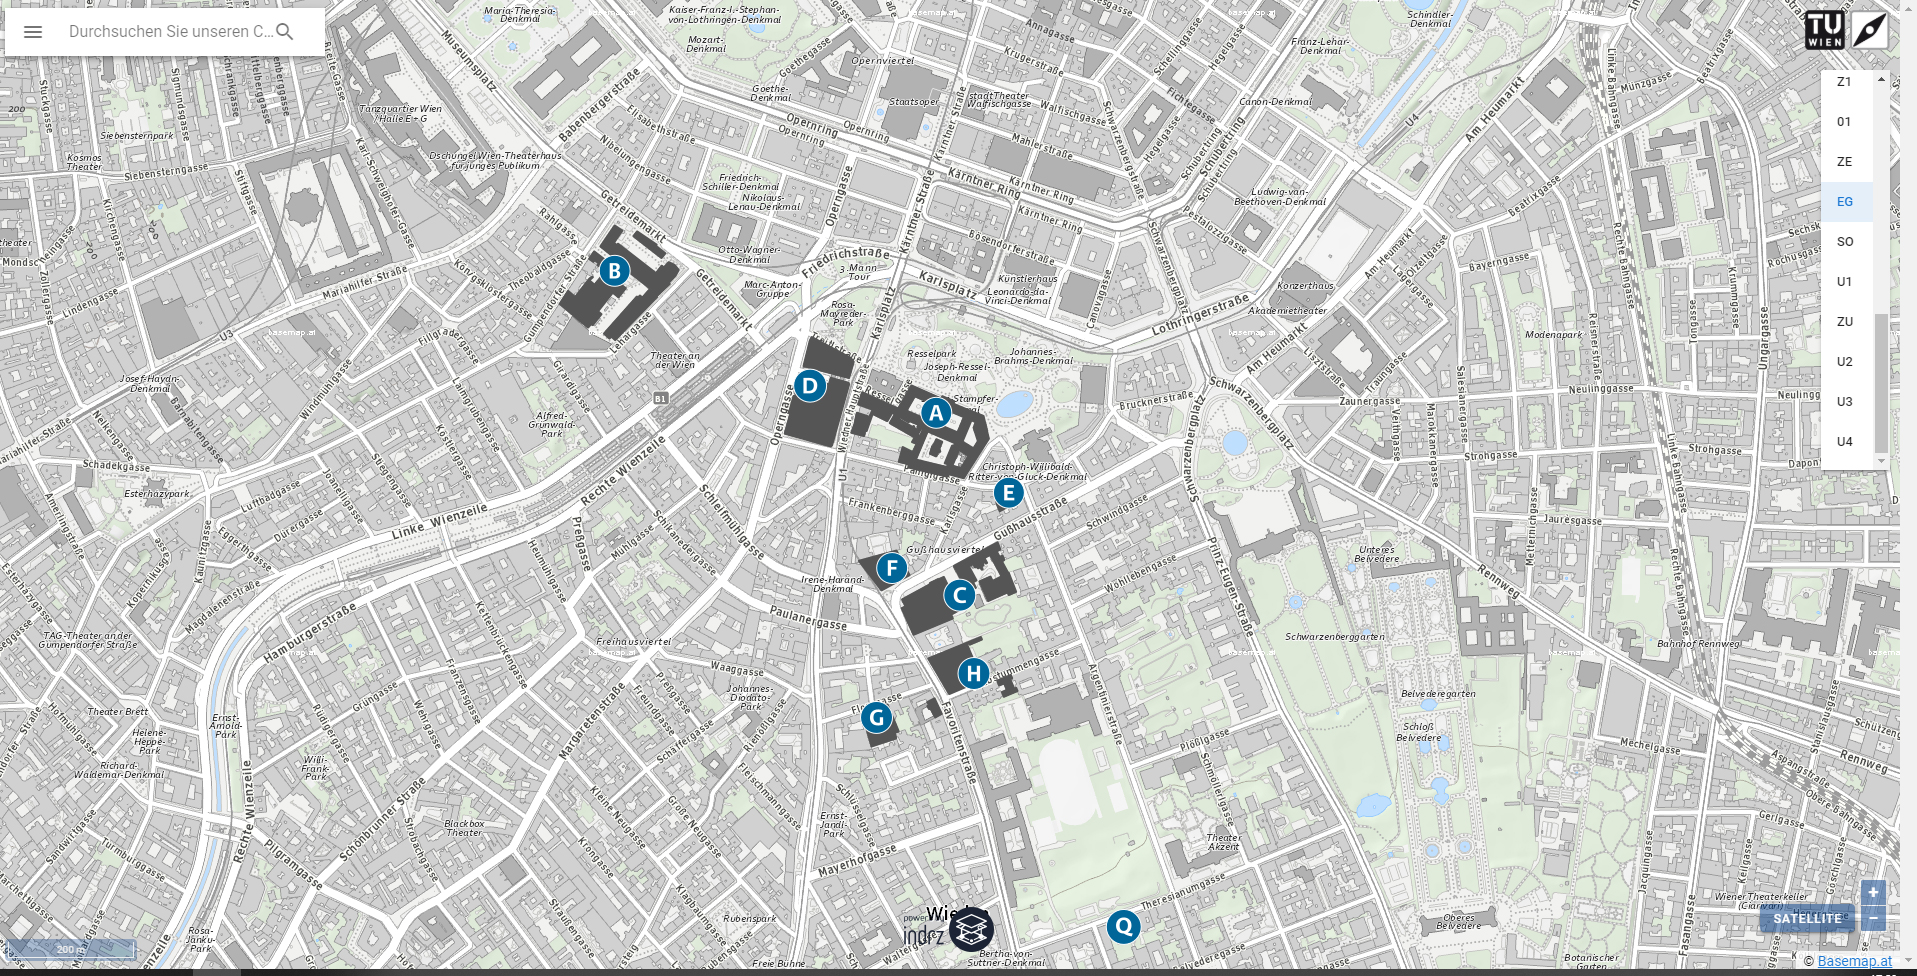 Section of the campus area of TU Wien from the program TUmaps